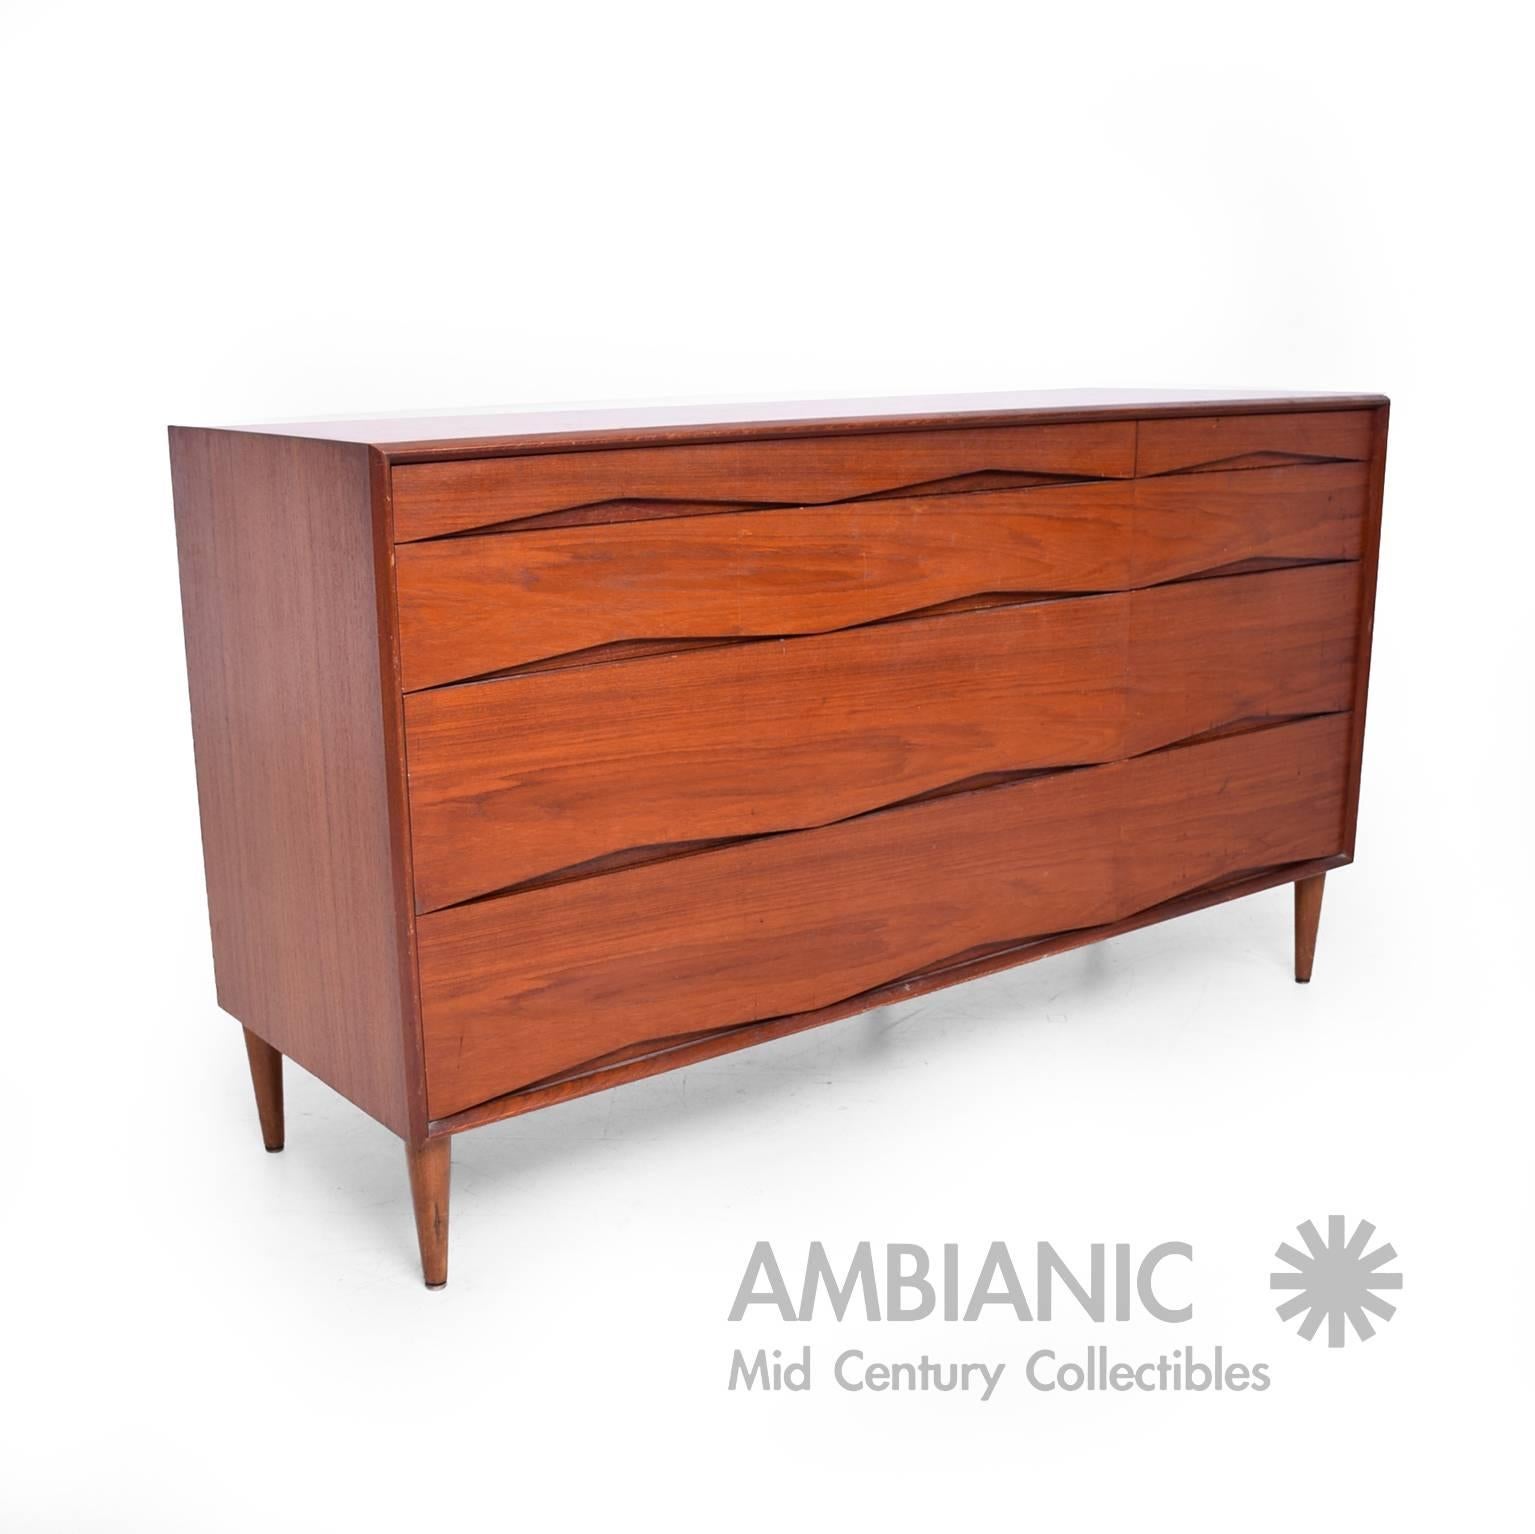 For your consideration a Danish modern double dresser in teakwood with sculptural handles. 

Stamped MADE IN DENMARK.

32 1/8